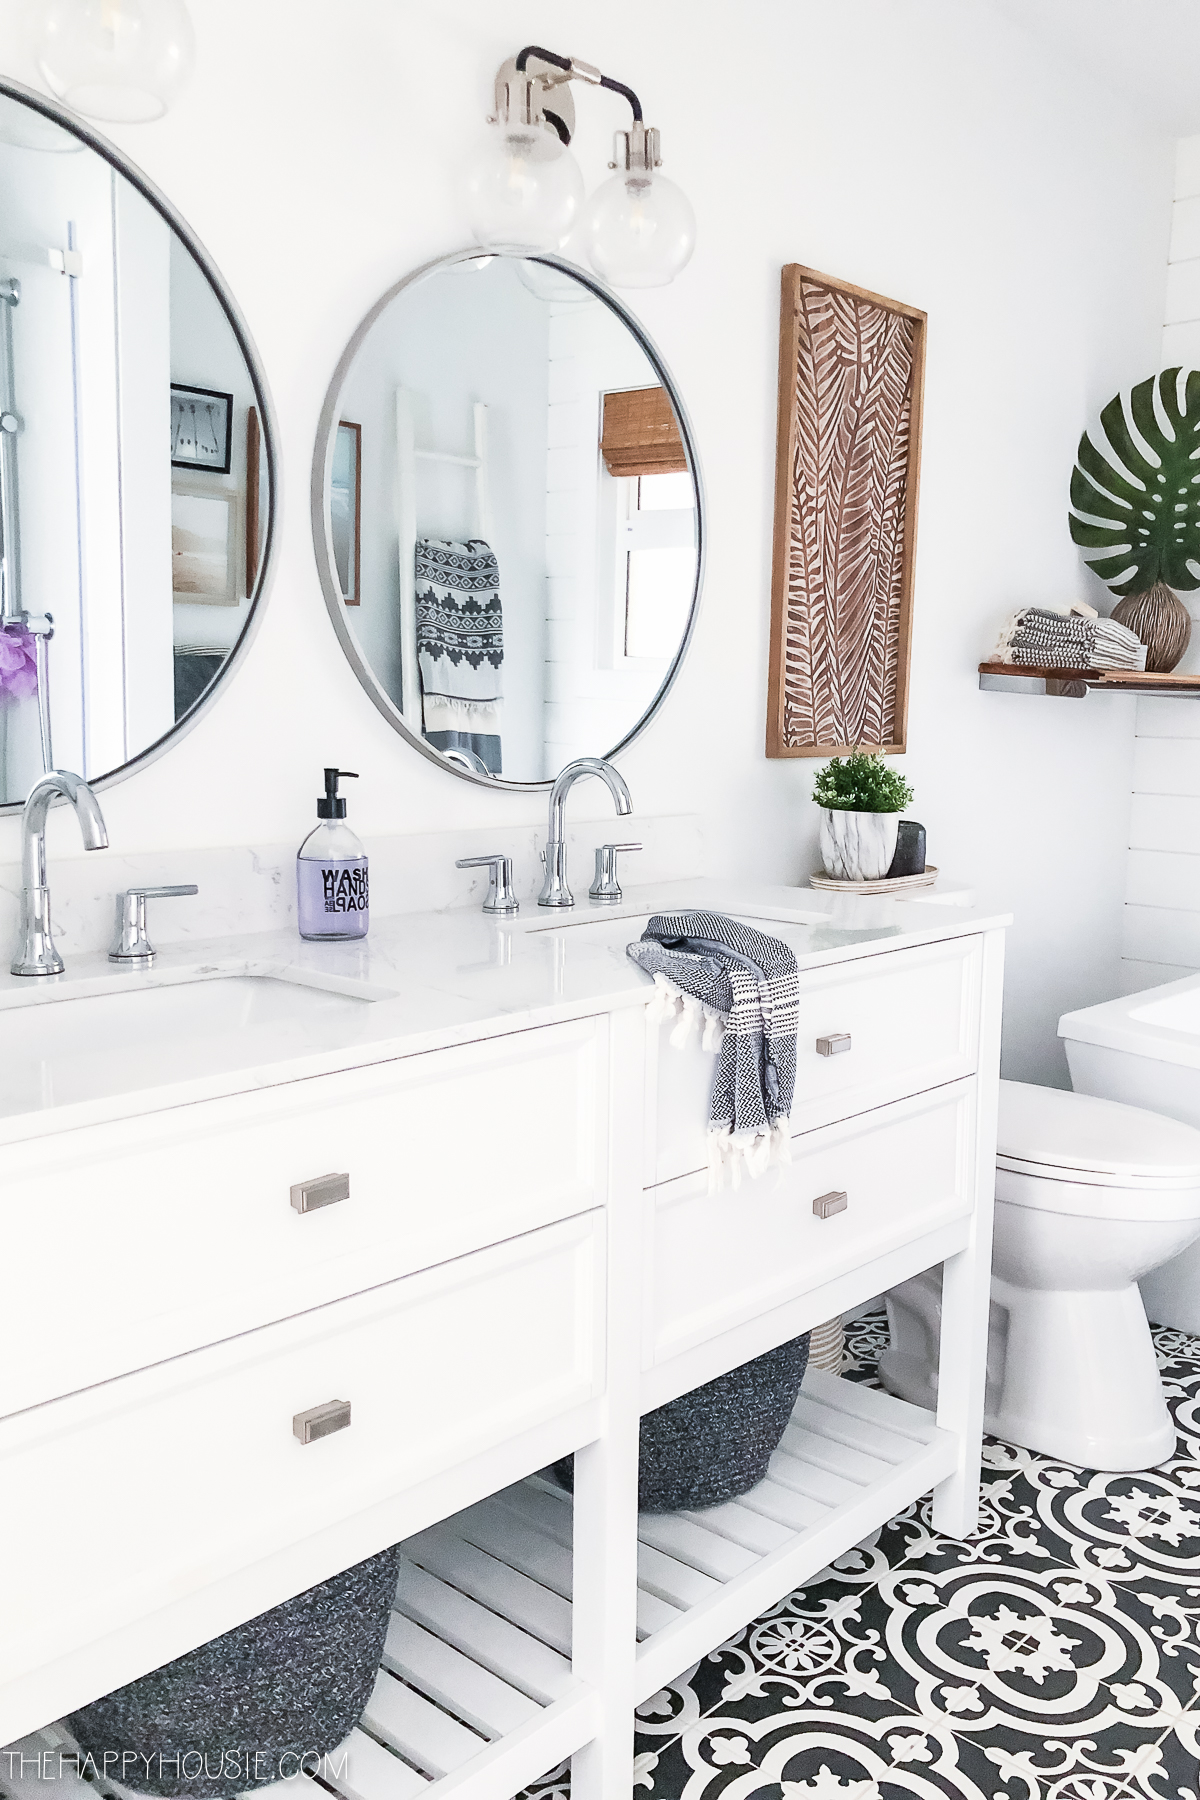 https://www.thehappyhousie.com/wp-content/uploads/2020/02/how-to-organize-your-bathroom-even-if-you-dont-have-much-storage-space-20.jpg